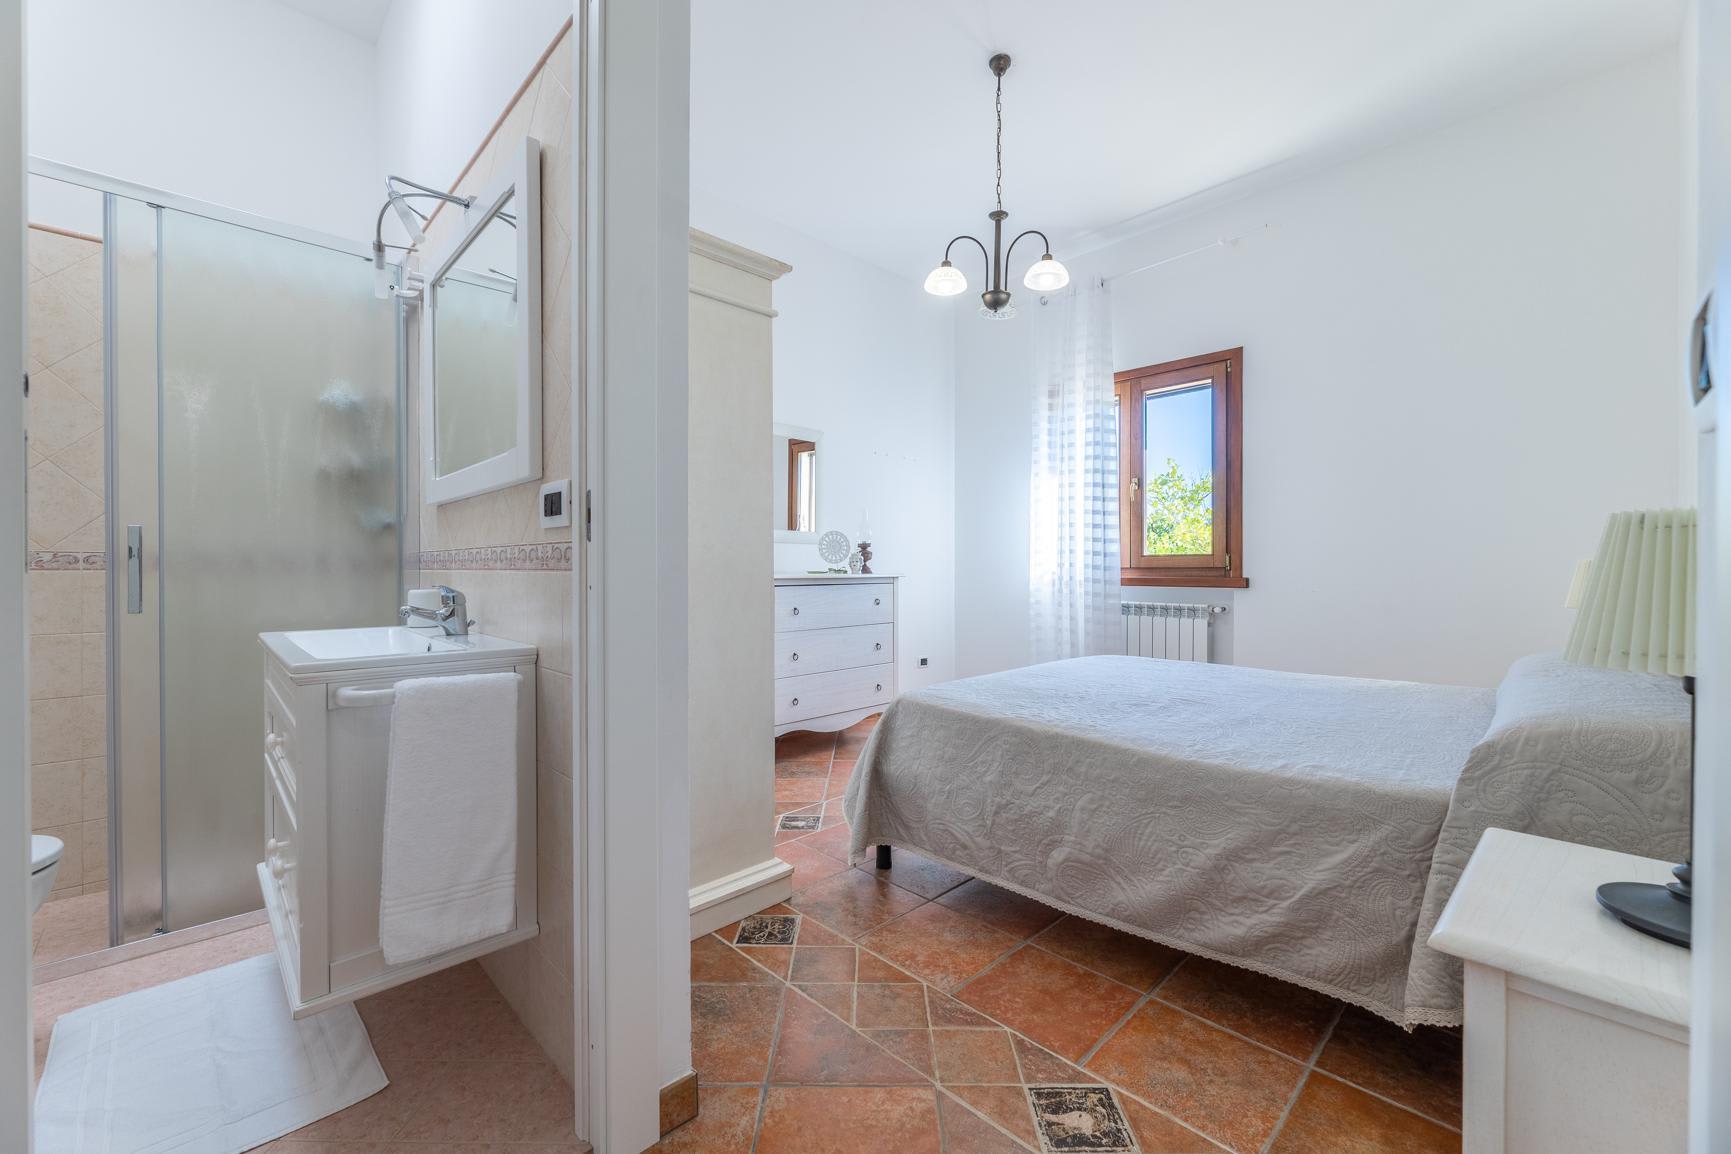 Historic Trullo in Carovigno with Refreshing Pool